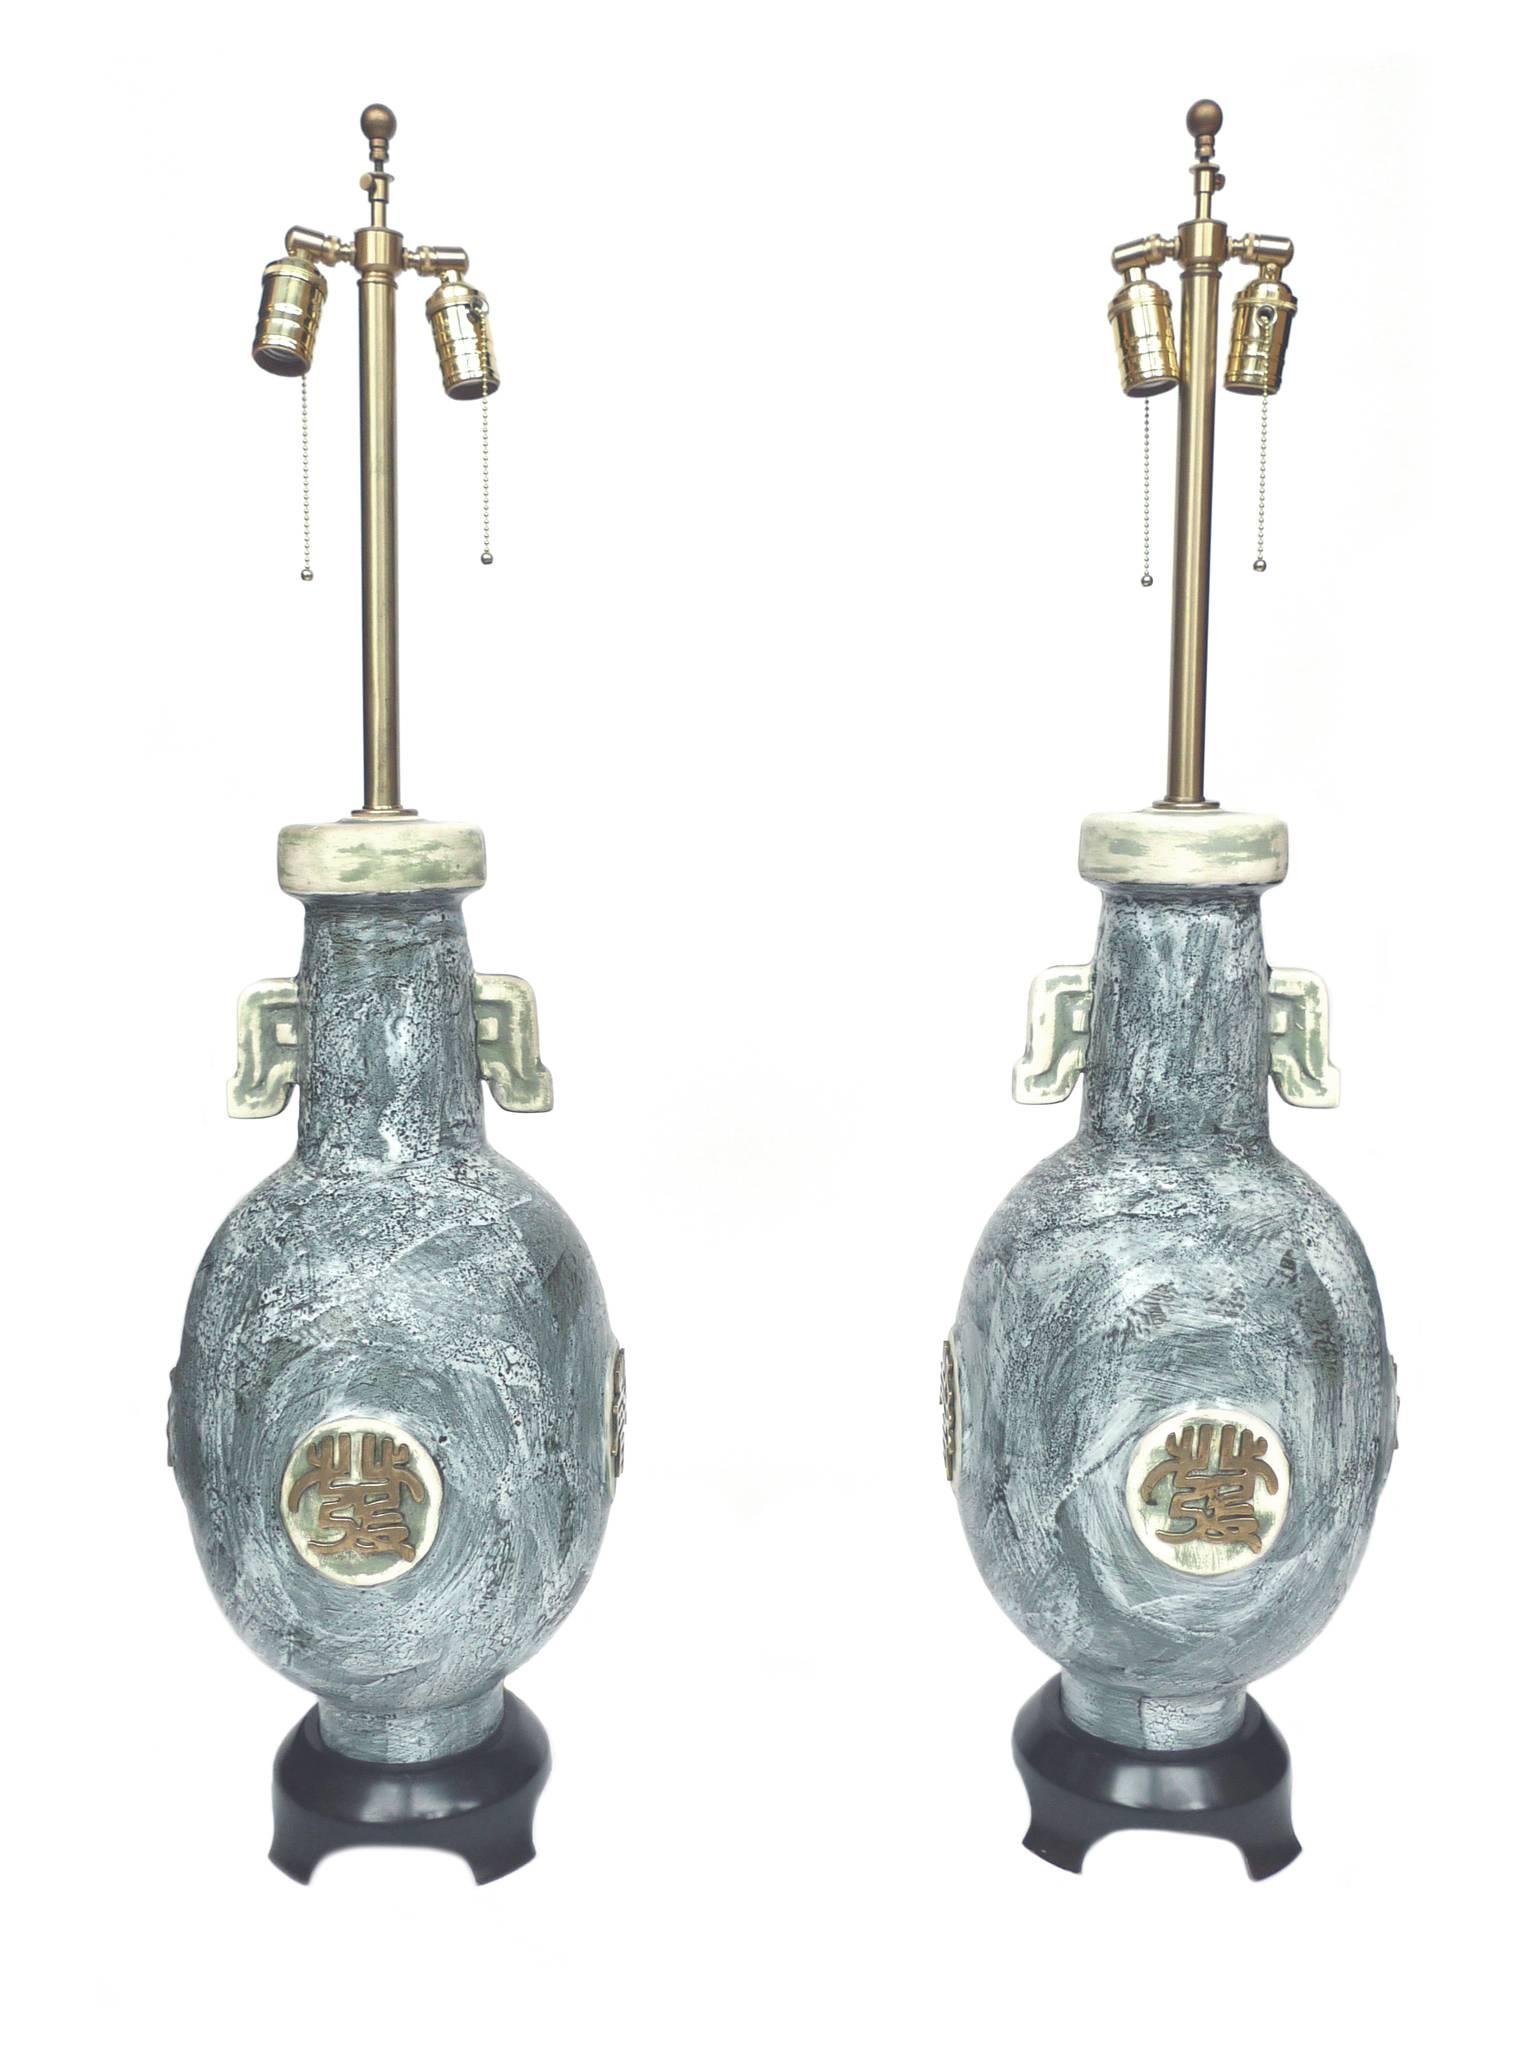 These lamps were produced by the Marbro Lamp Company. Their design includes a ceramic jar body with a painterly blue-gray glaze and stylized brass decorations adorning each side of the lamp. The bases are ebonized wood. The lamps have been newly